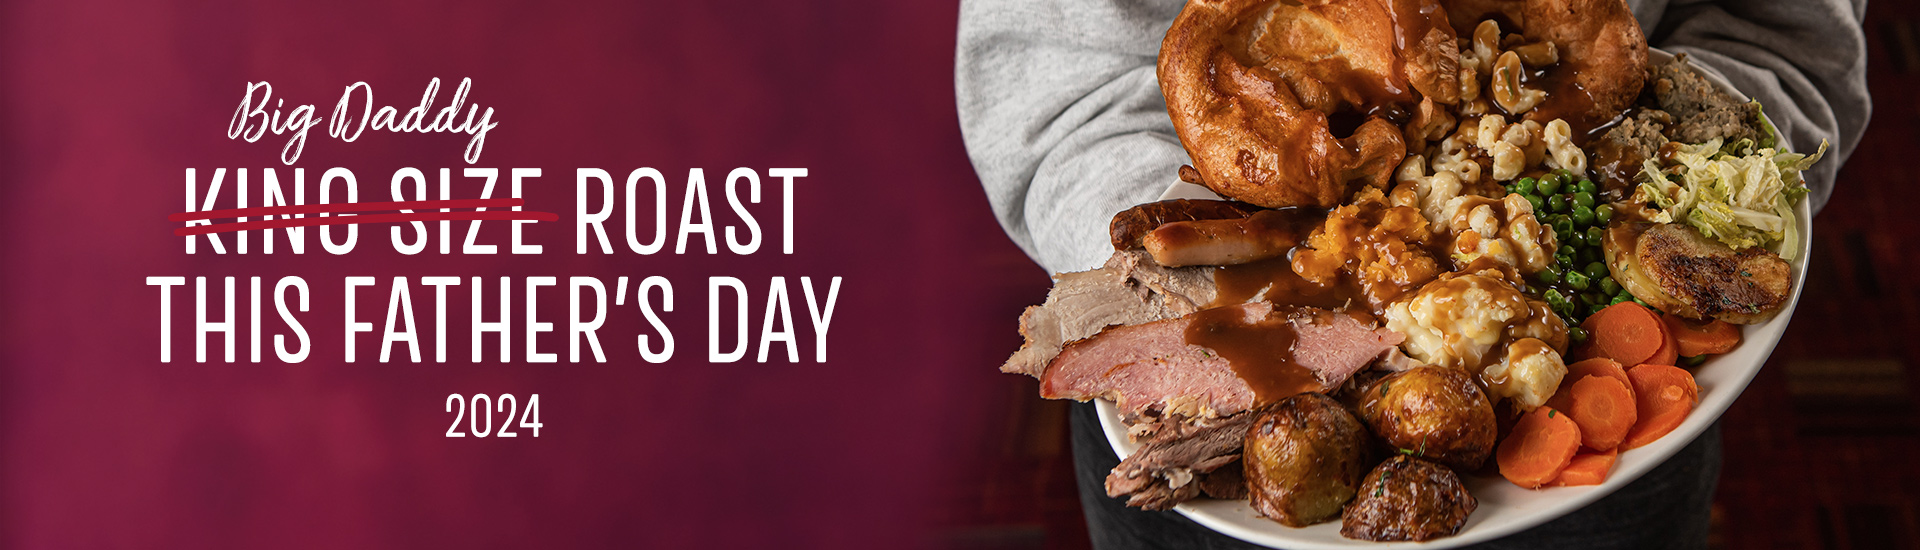 Father’s day carvery in Leeds, Father’s day at Toby Carvery Bruntcliffe